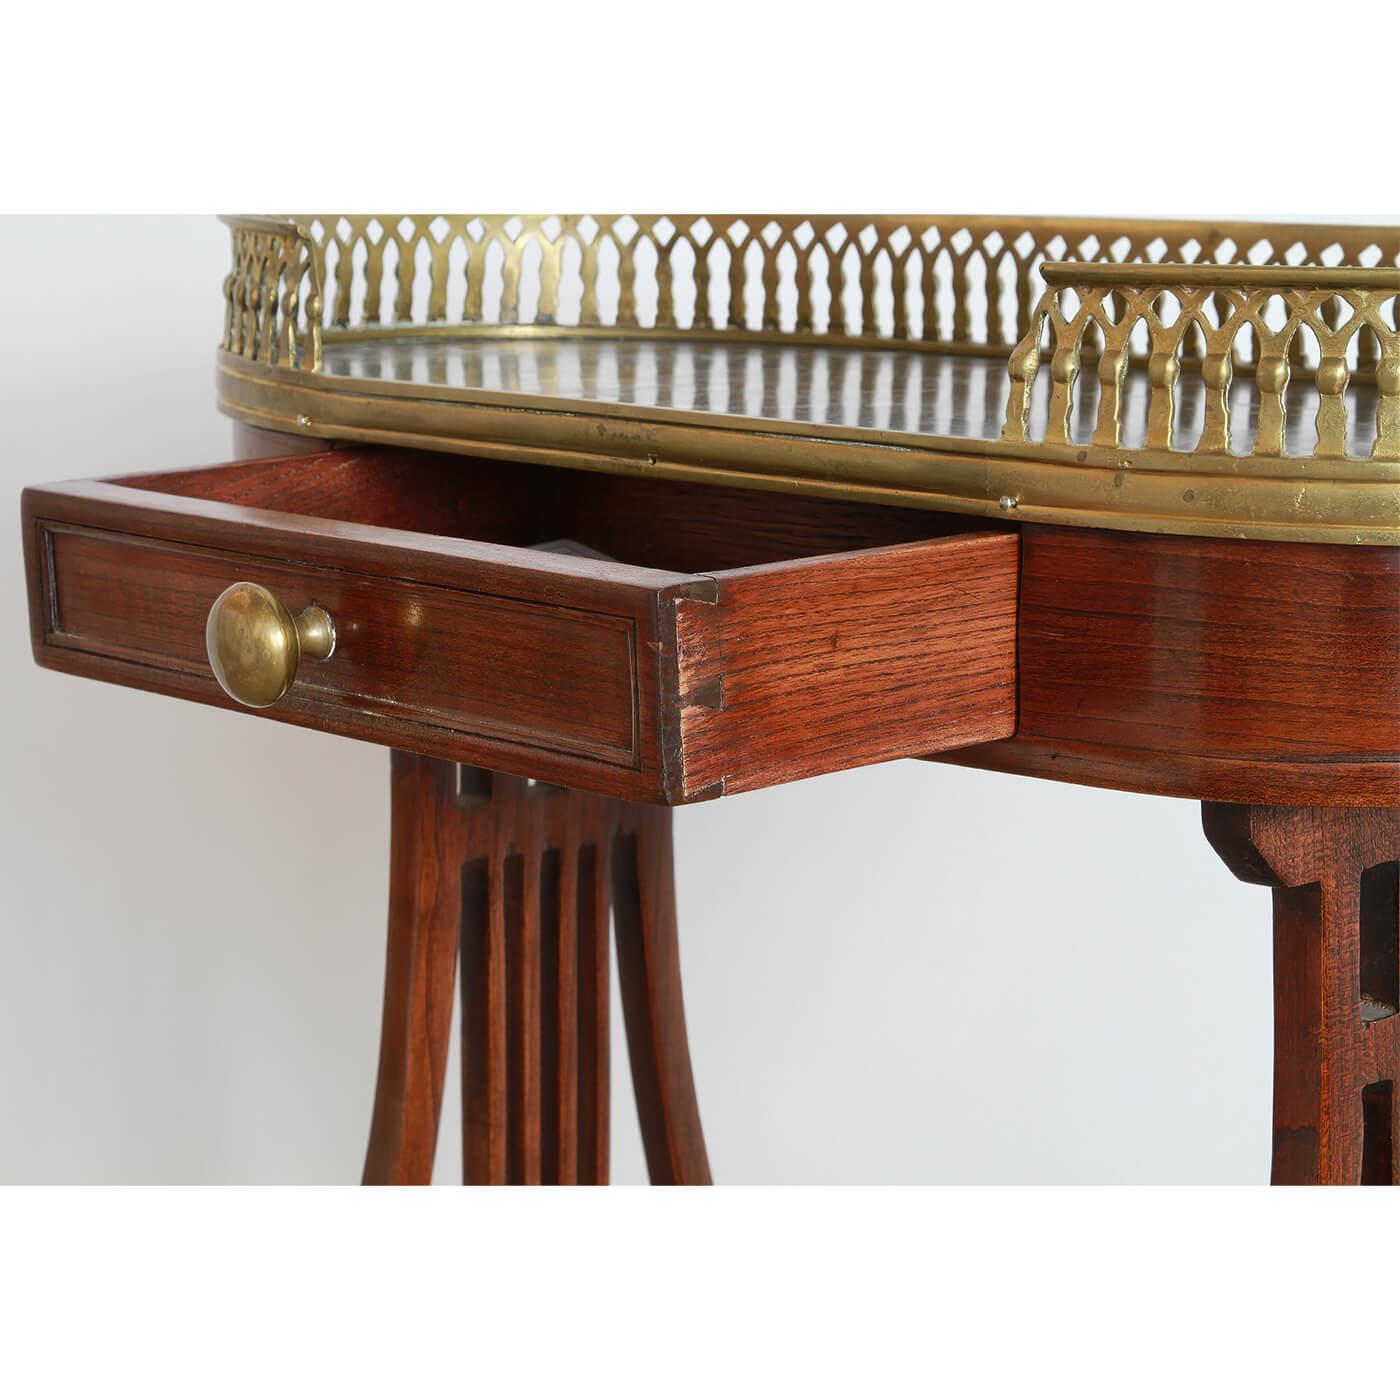 An unusual French Directoire mahogany Vide Poche or side table with an unusual pierced bronze gallery, a single frieze drawer on lyre end trestle supports. Ca 1890

Dimensions: 22